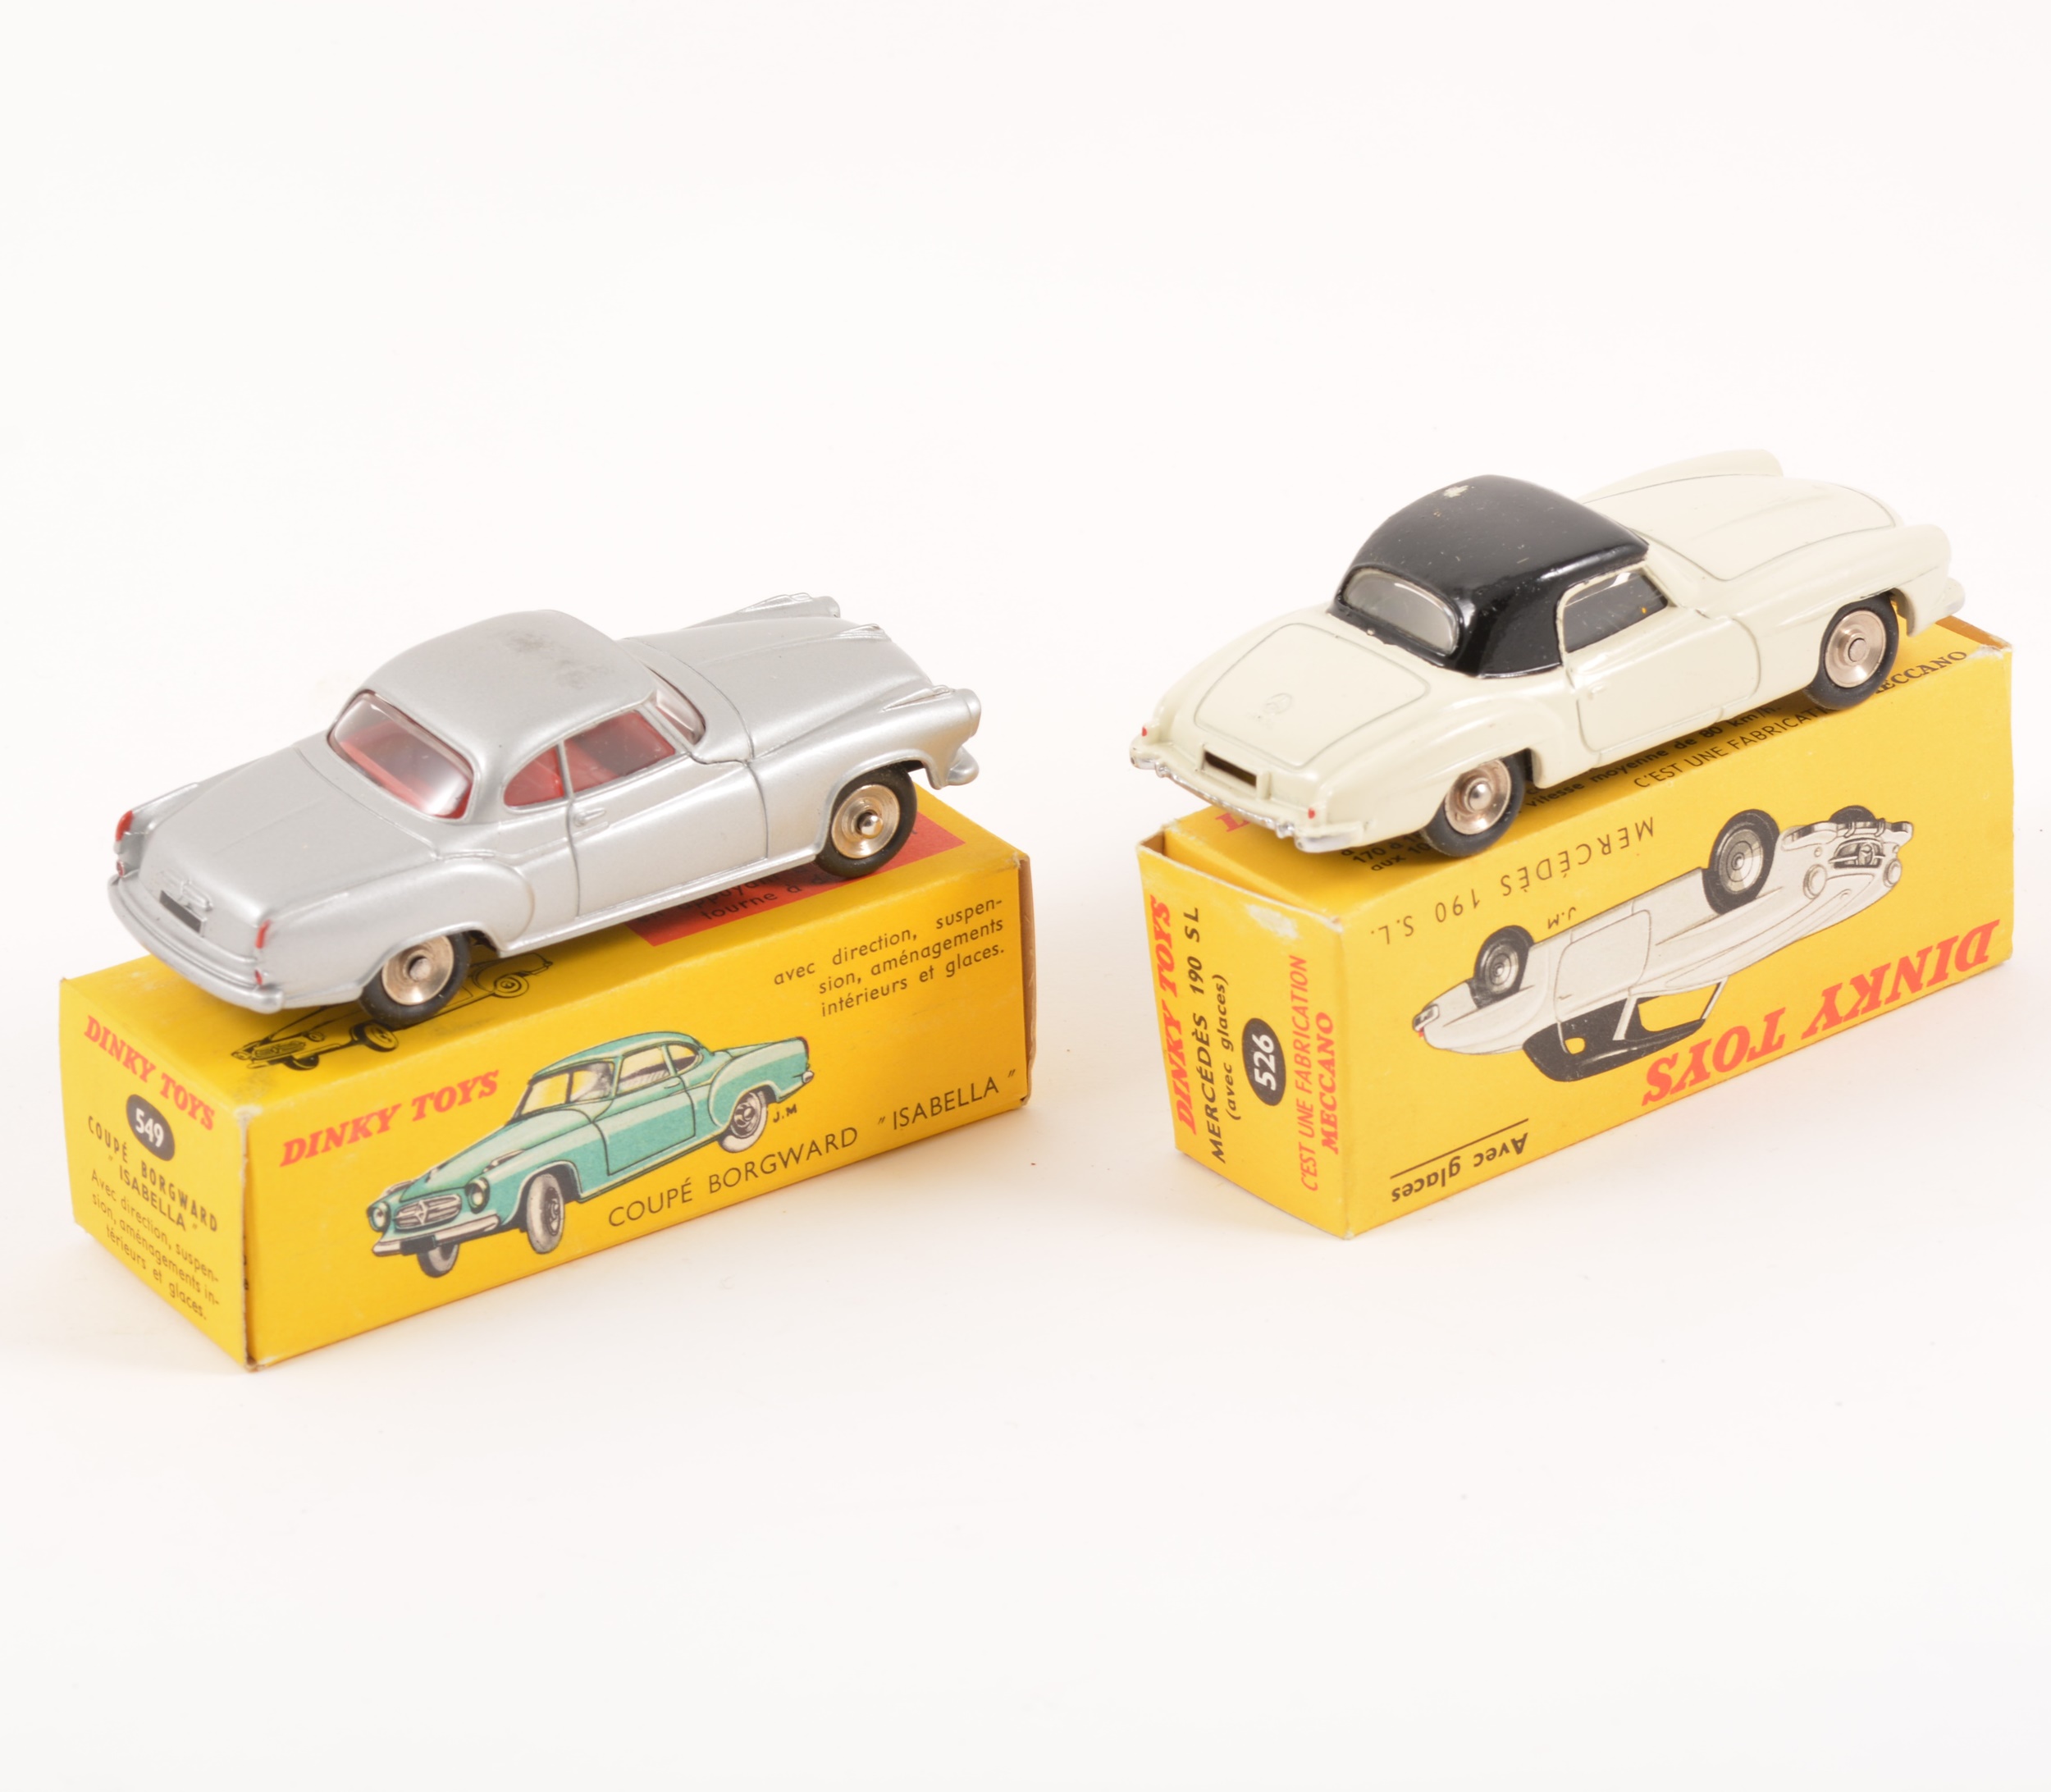 Two French Dinky Toys; no.526 Mercedes 190 SL, cream and black body, no.549 Coupe Borgward Isabella, - Image 2 of 2